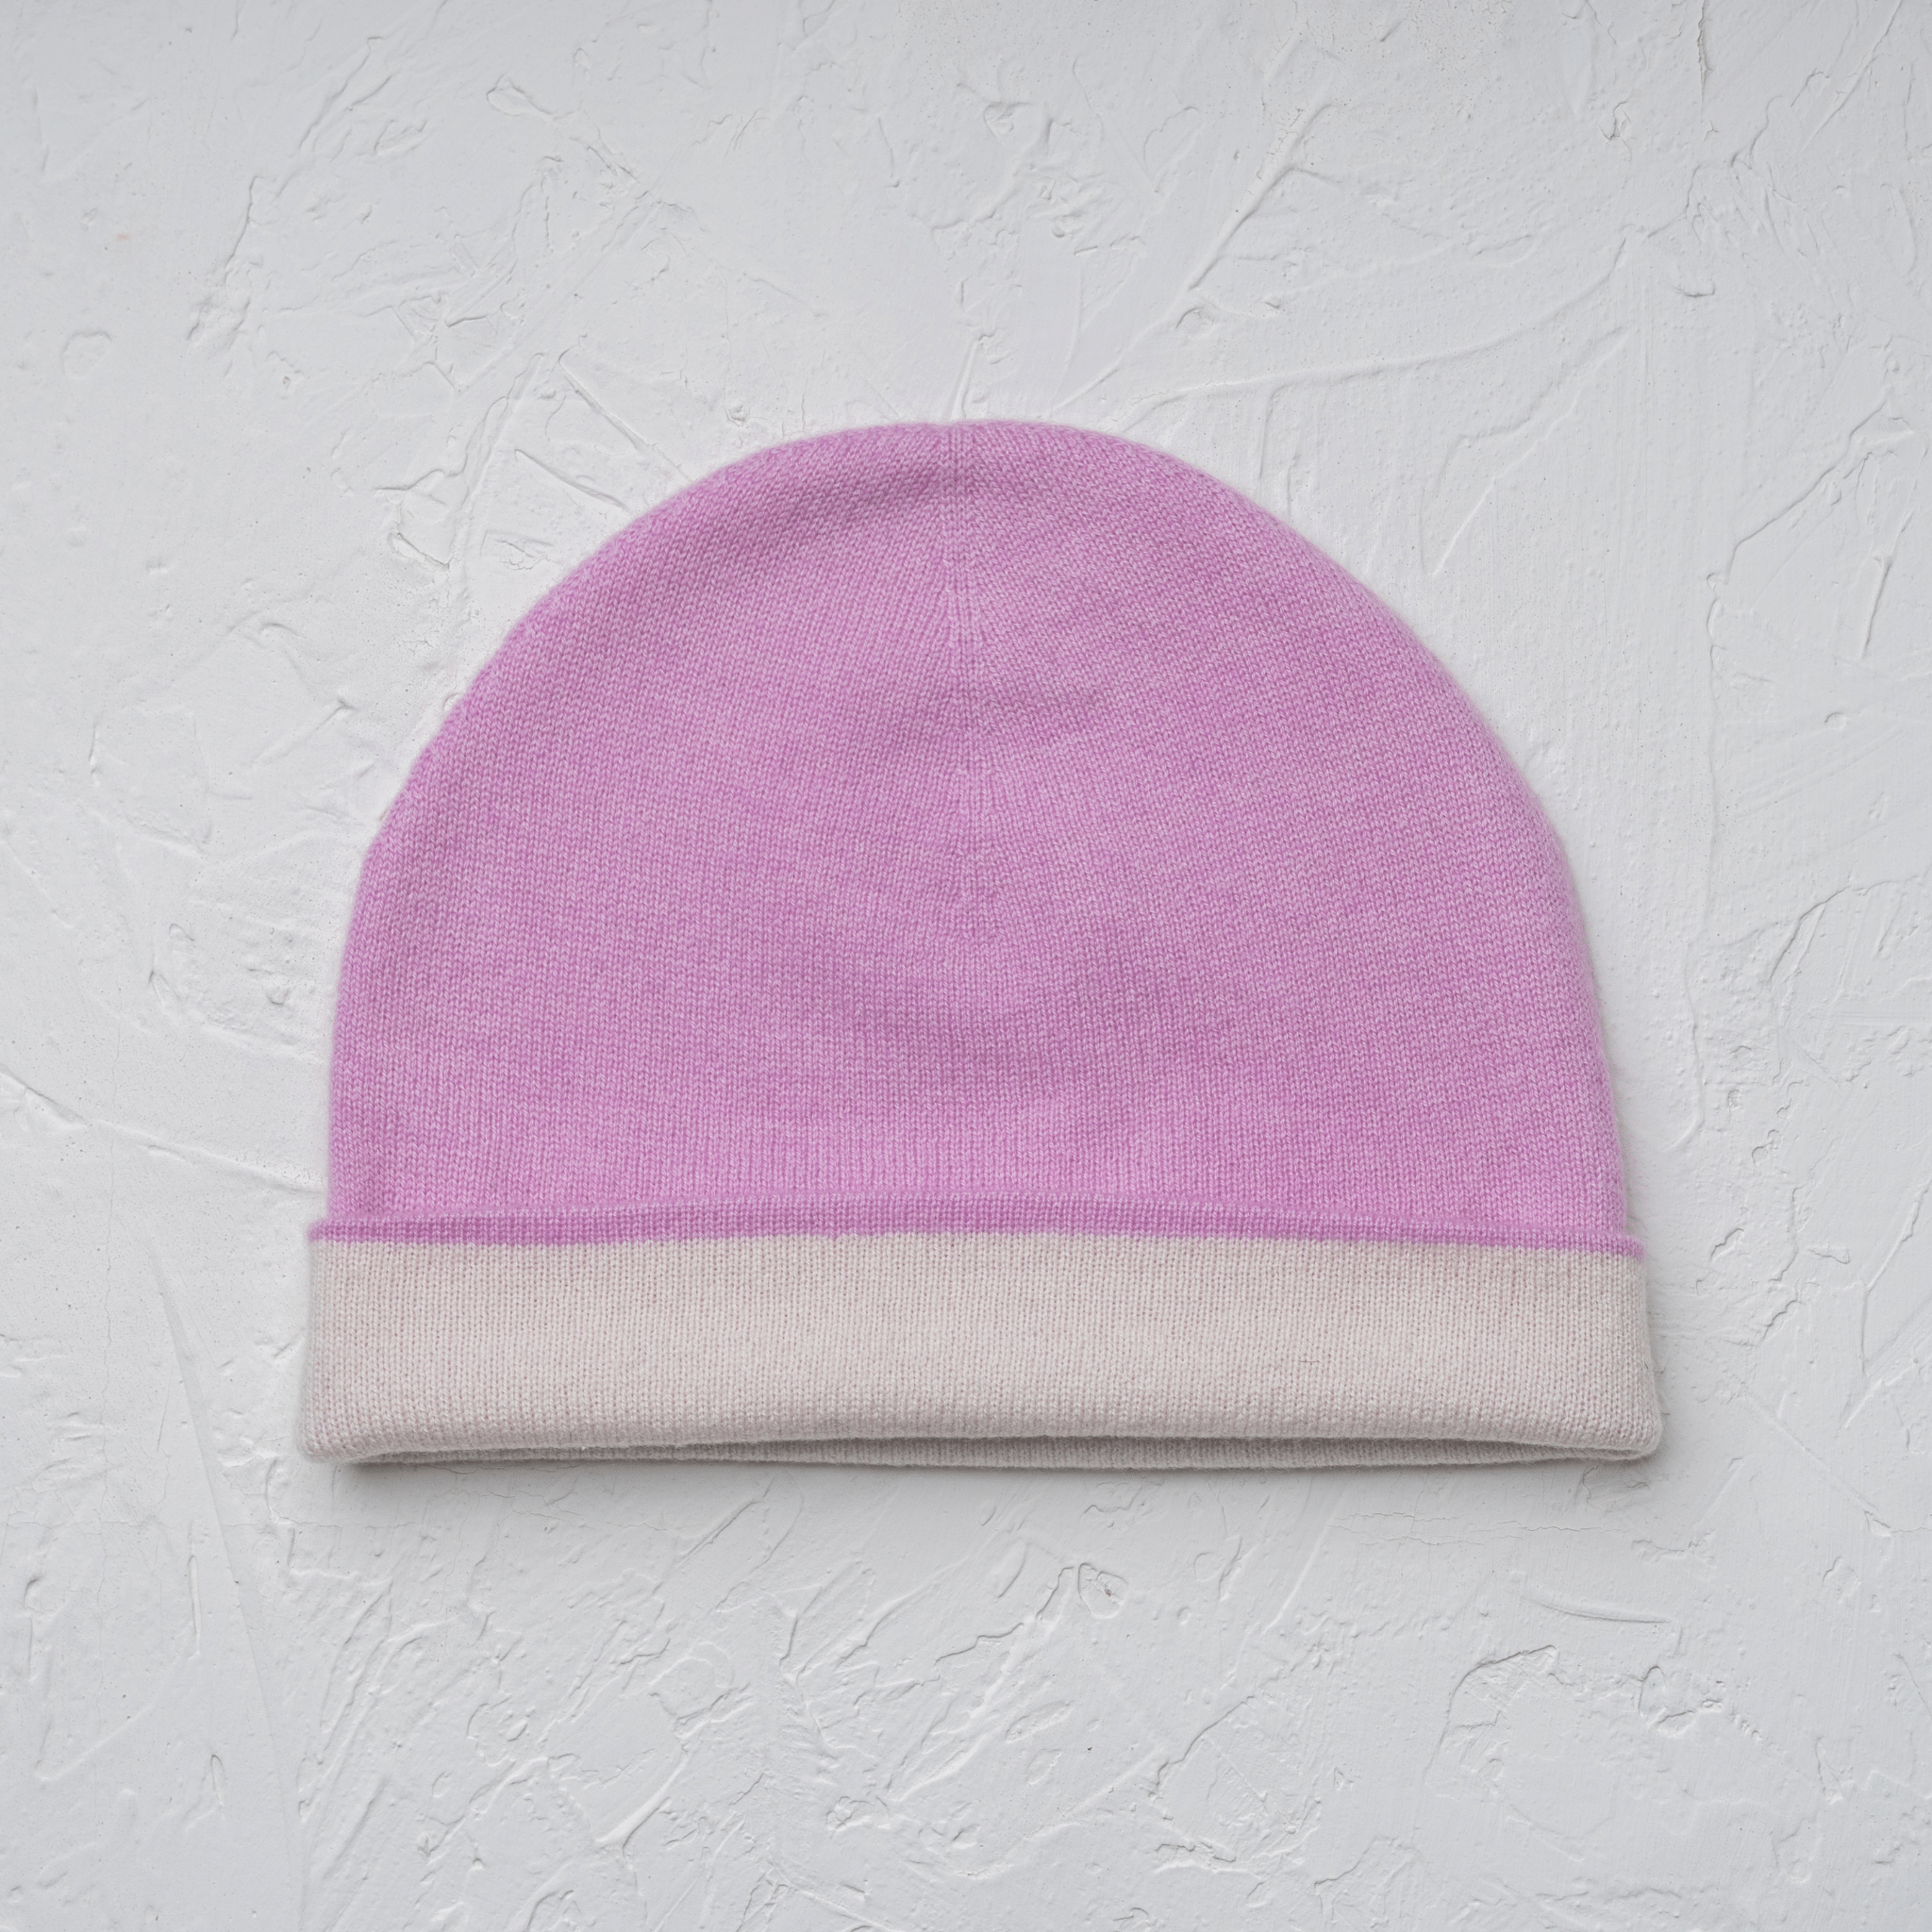 100% Cashmere Reversible Pink/White Beanie – Imperial Cashmere